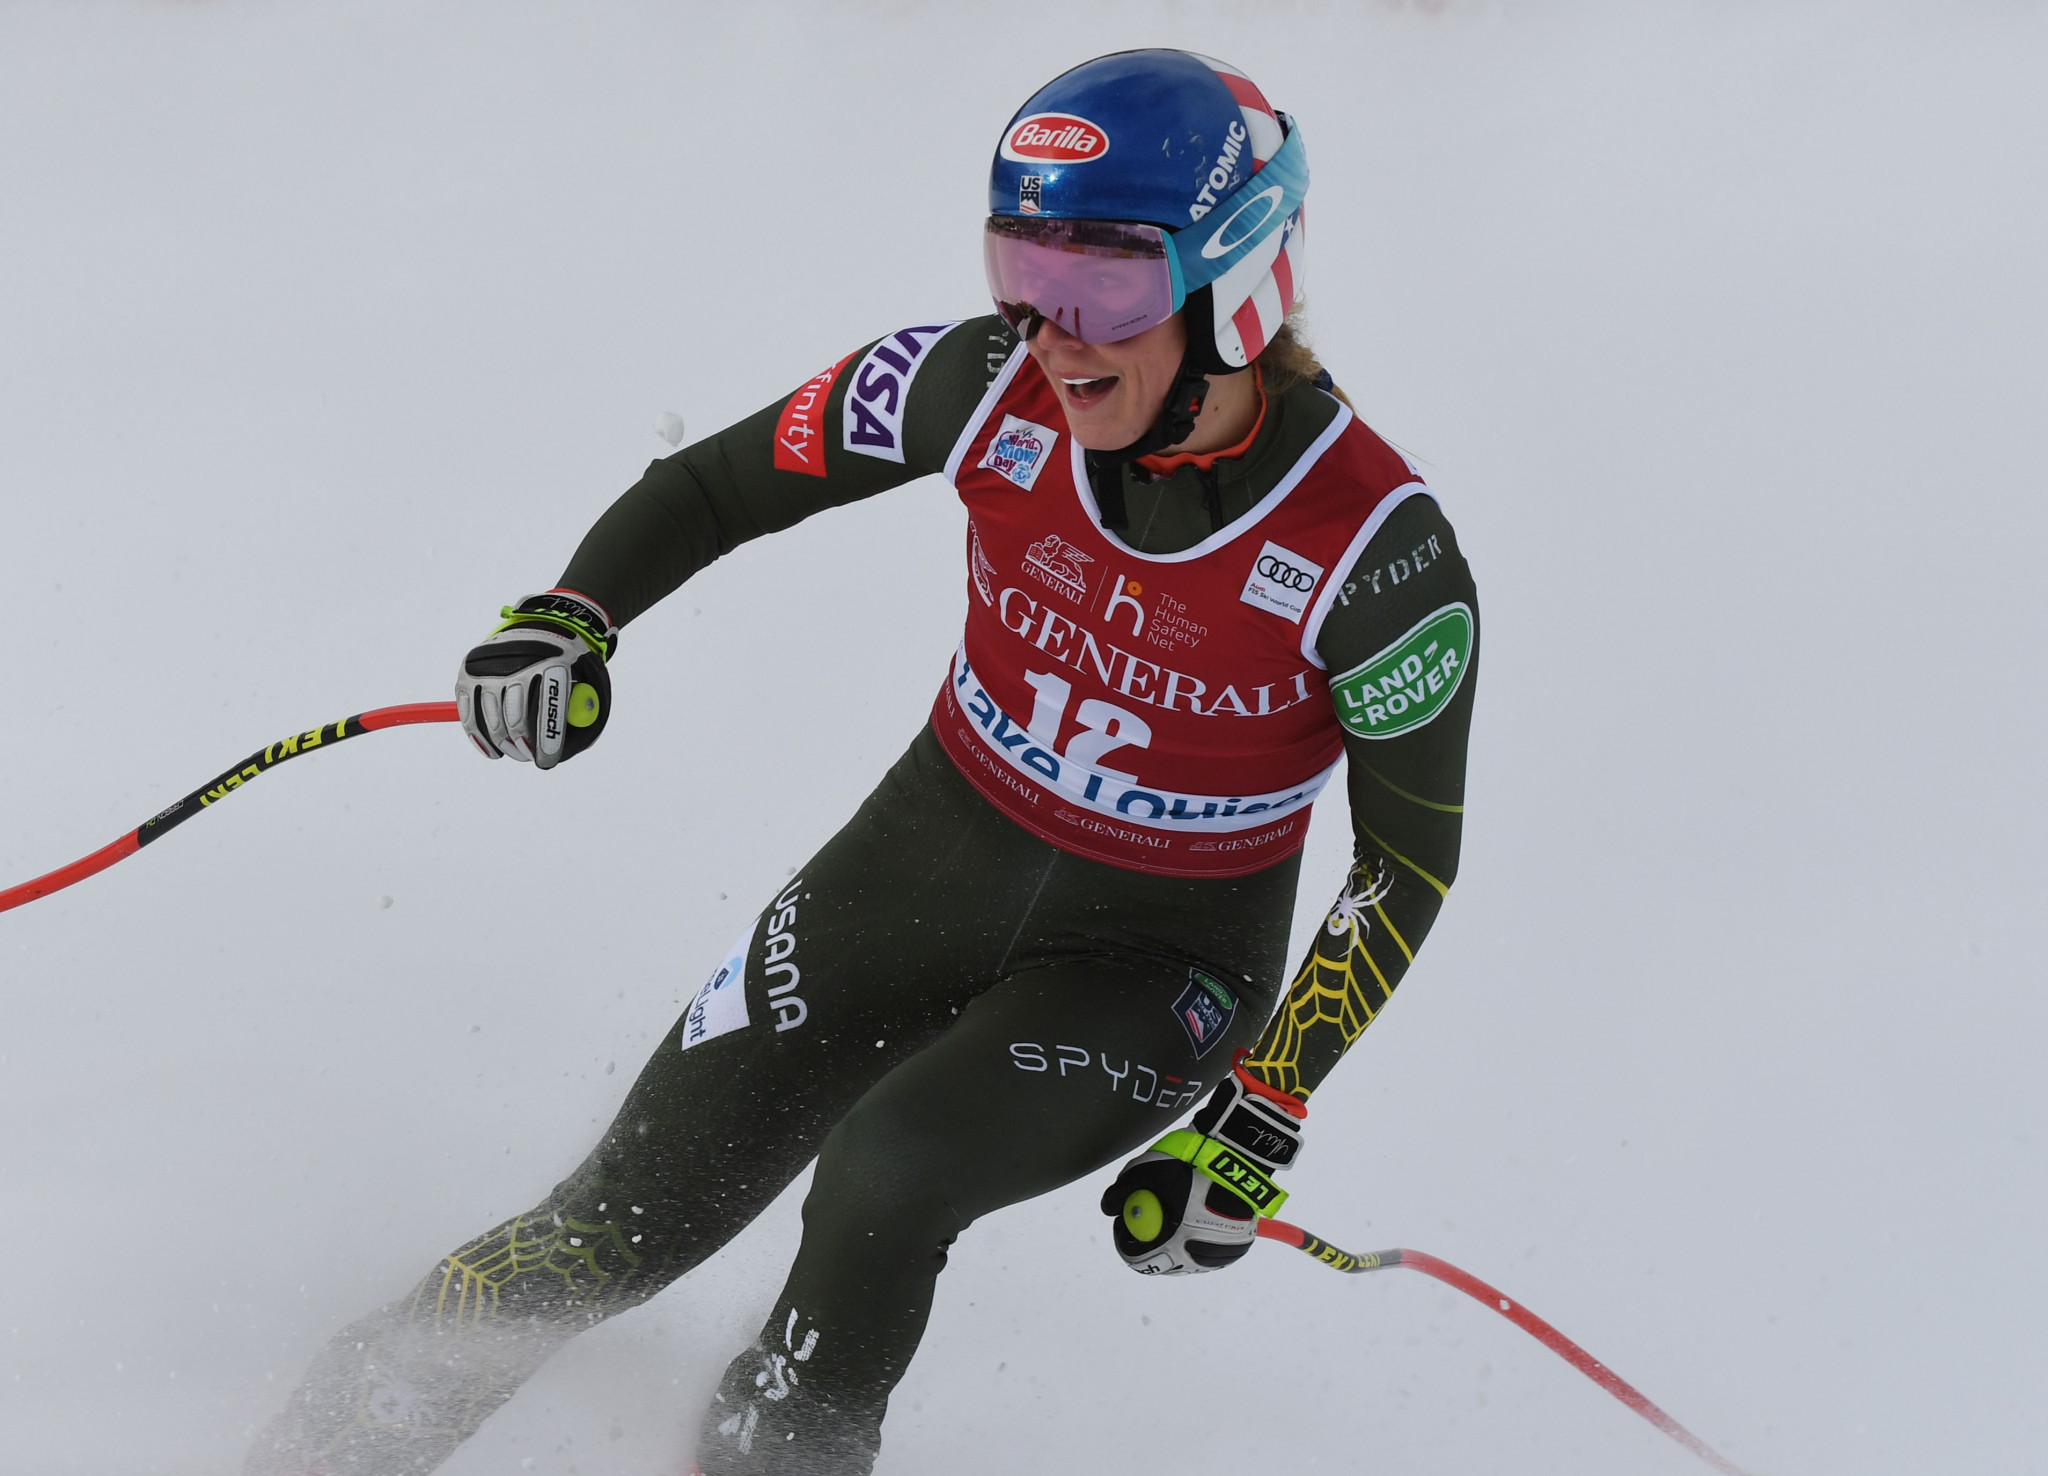 Mikaela Shiffrin finished in second place during the Women's Downhill in Lake Louise ©Getty Images